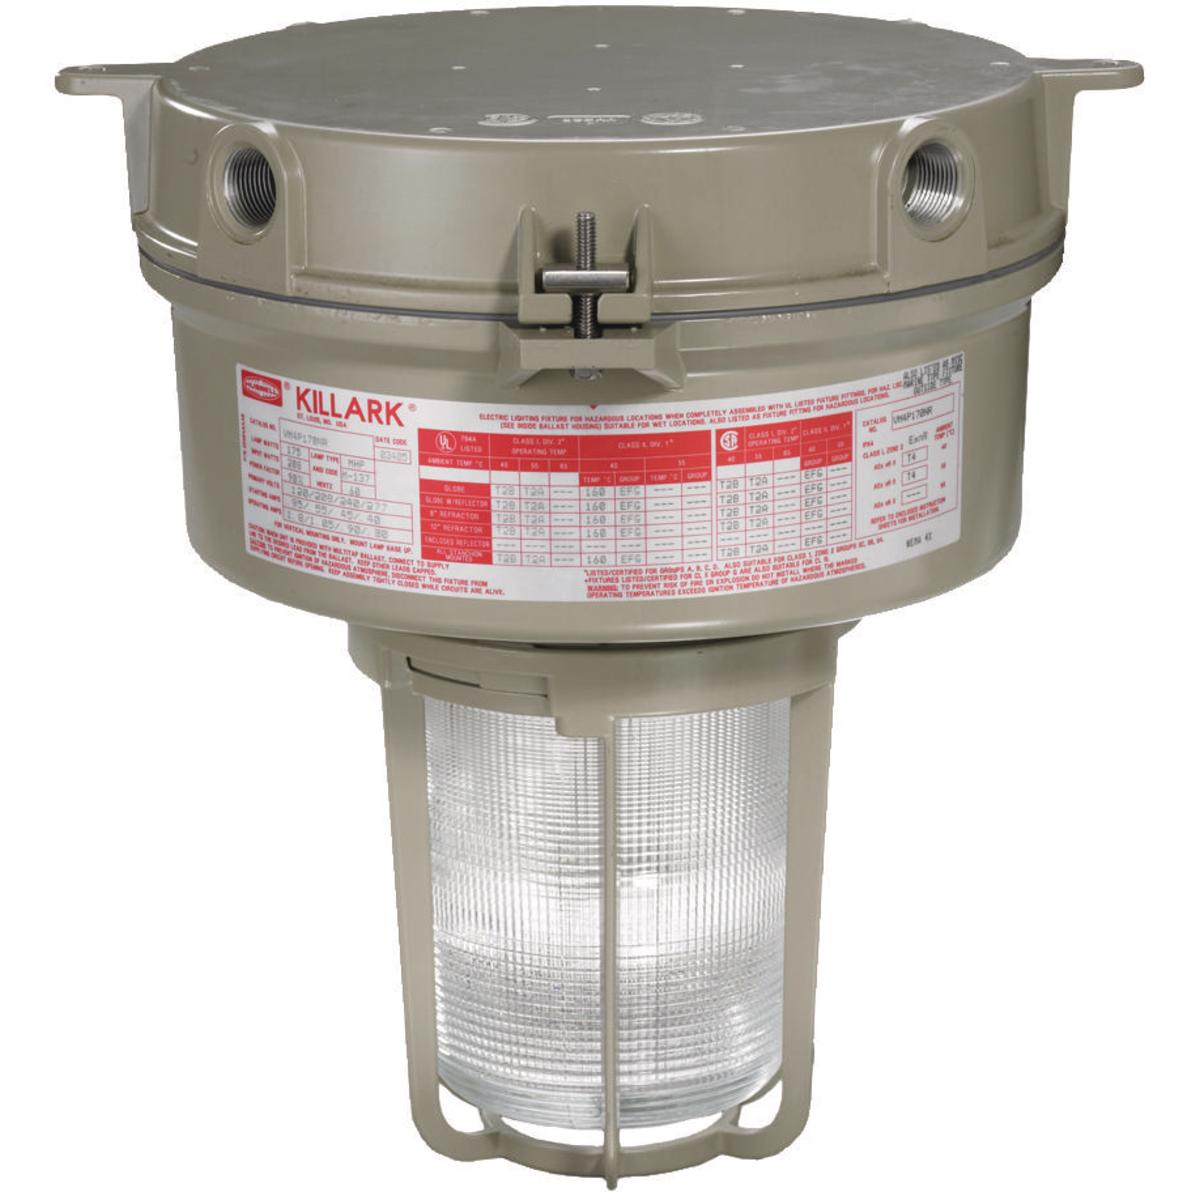 Hubbell VE3Q0018E30X2R5G VE3 18W Emergency, 120-277V, 3/4" Ceiling Mount, Type V Glass Refractor  with Guard  ; Quad-Pin triple-tube long-life compact fluorescent lamps included ; World Voltage 120-277VAC 50-60 Hz ; LED charging indicator light visible through lens ; Prewired ter